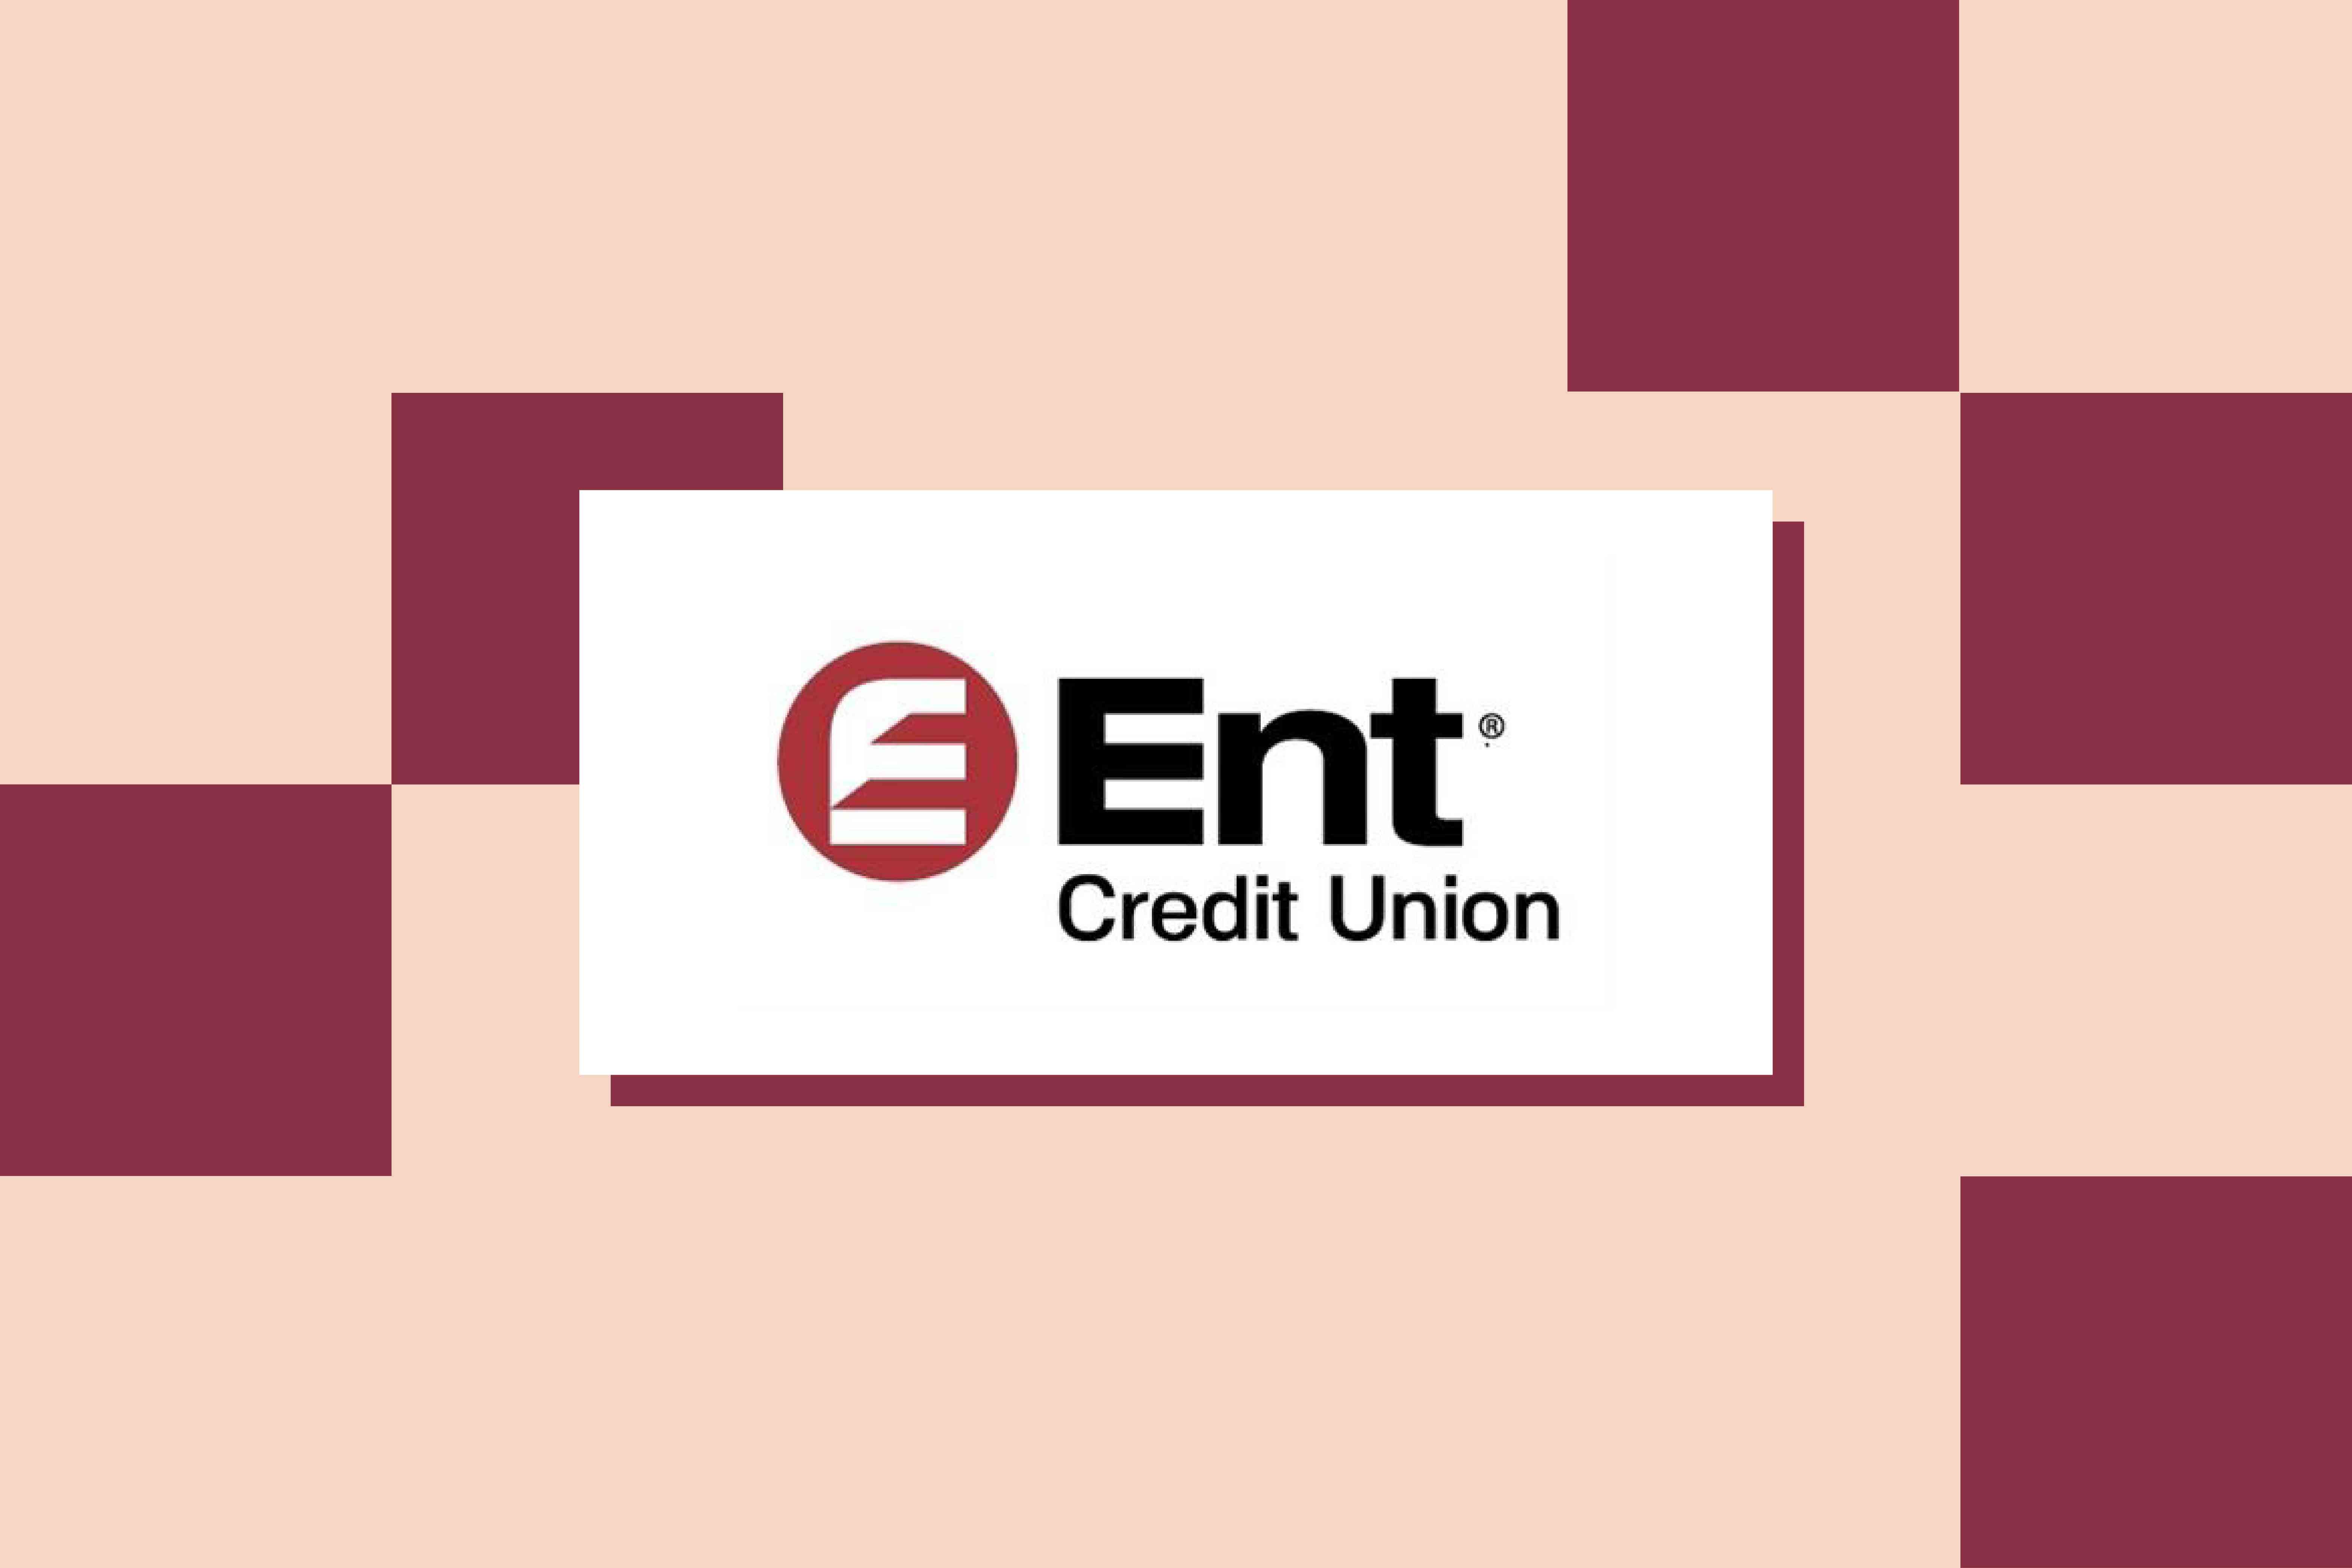 The Ent Credit Union logo drifts over a field of aubergine and salmon squares and rectangles..